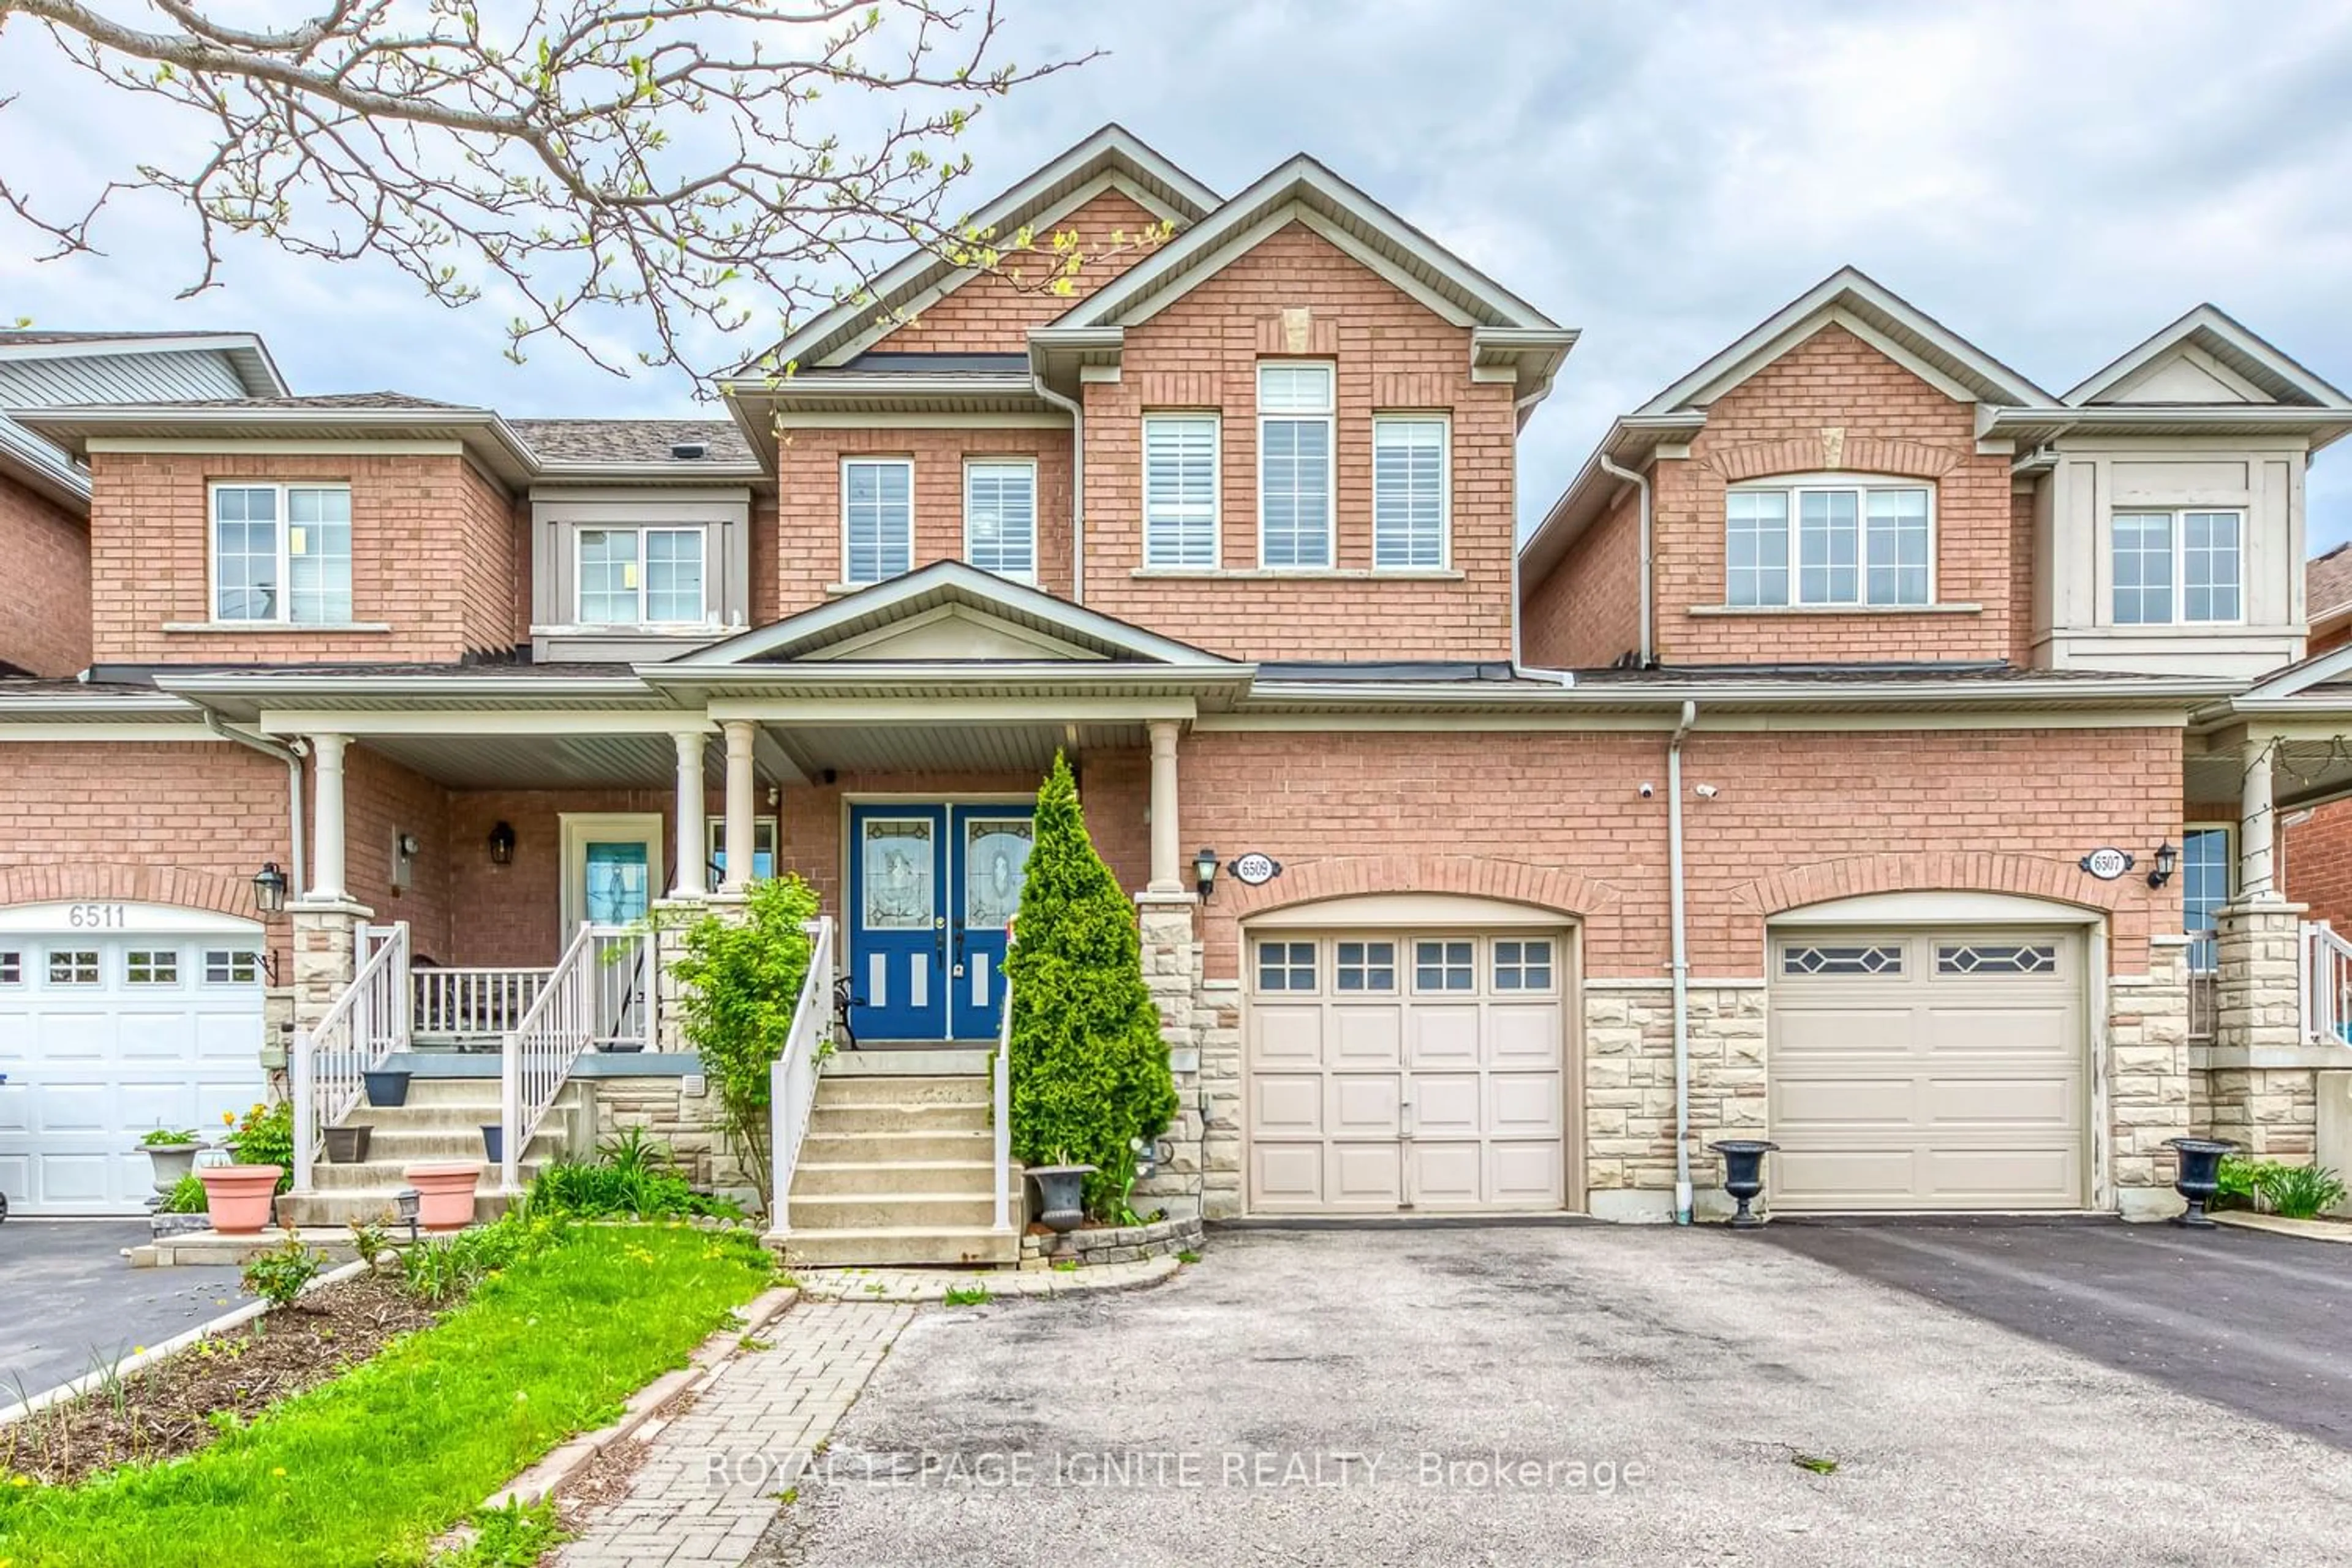 Home with brick exterior material for 6509 Skipper Way, Mississauga Ontario L5W 1P6